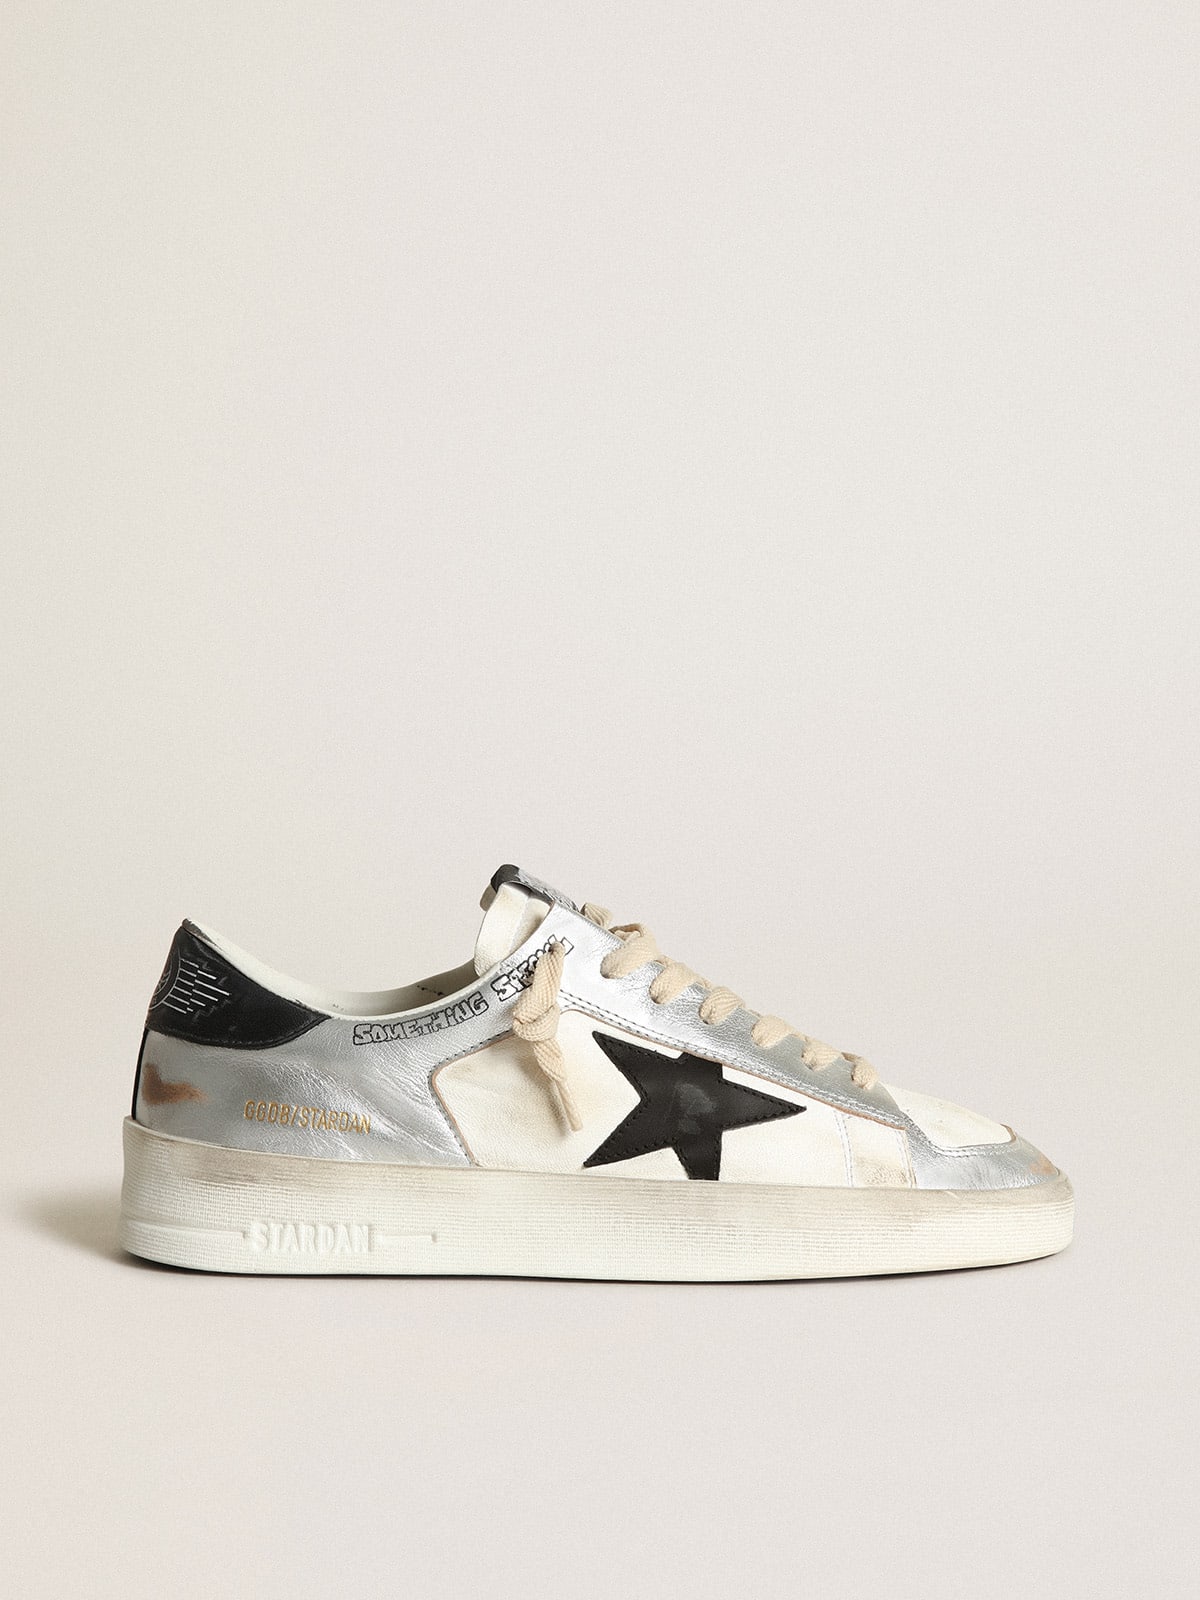 Women's Stardan sneakers in silver laminated leather with white nappa leather inserts and a black leather star